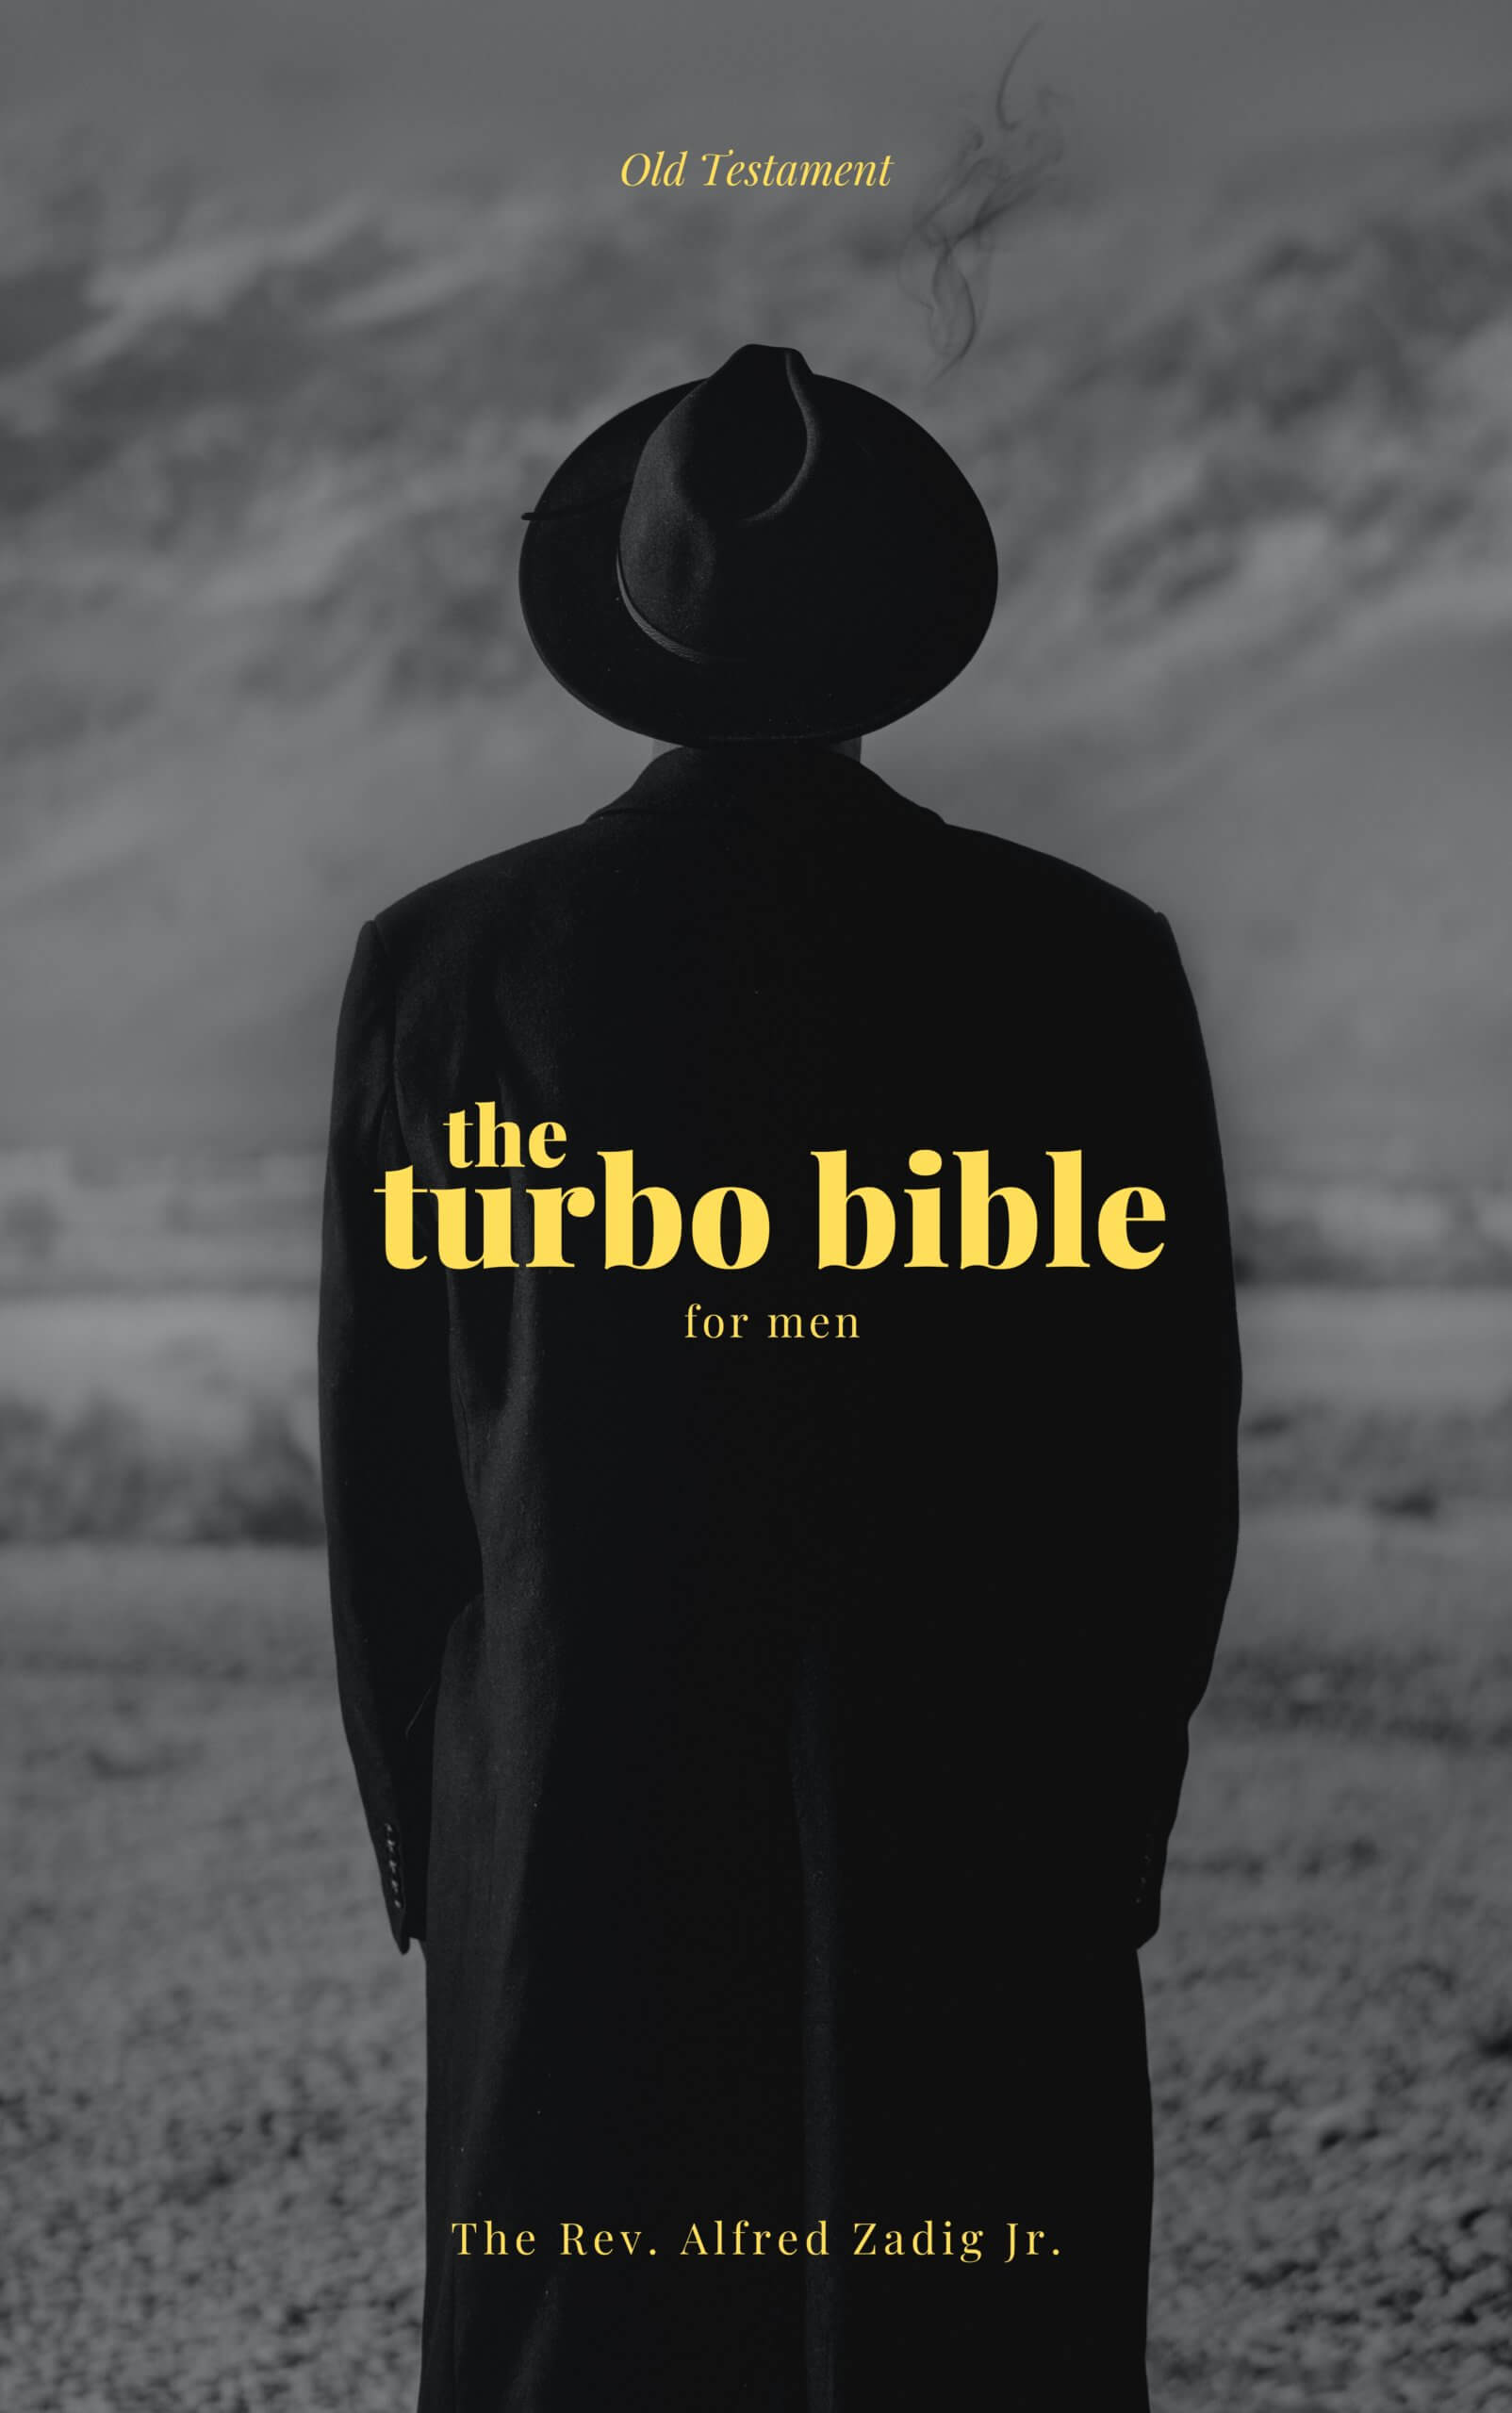 Click here to purchase The Turbo Bible for Men: Old Testament